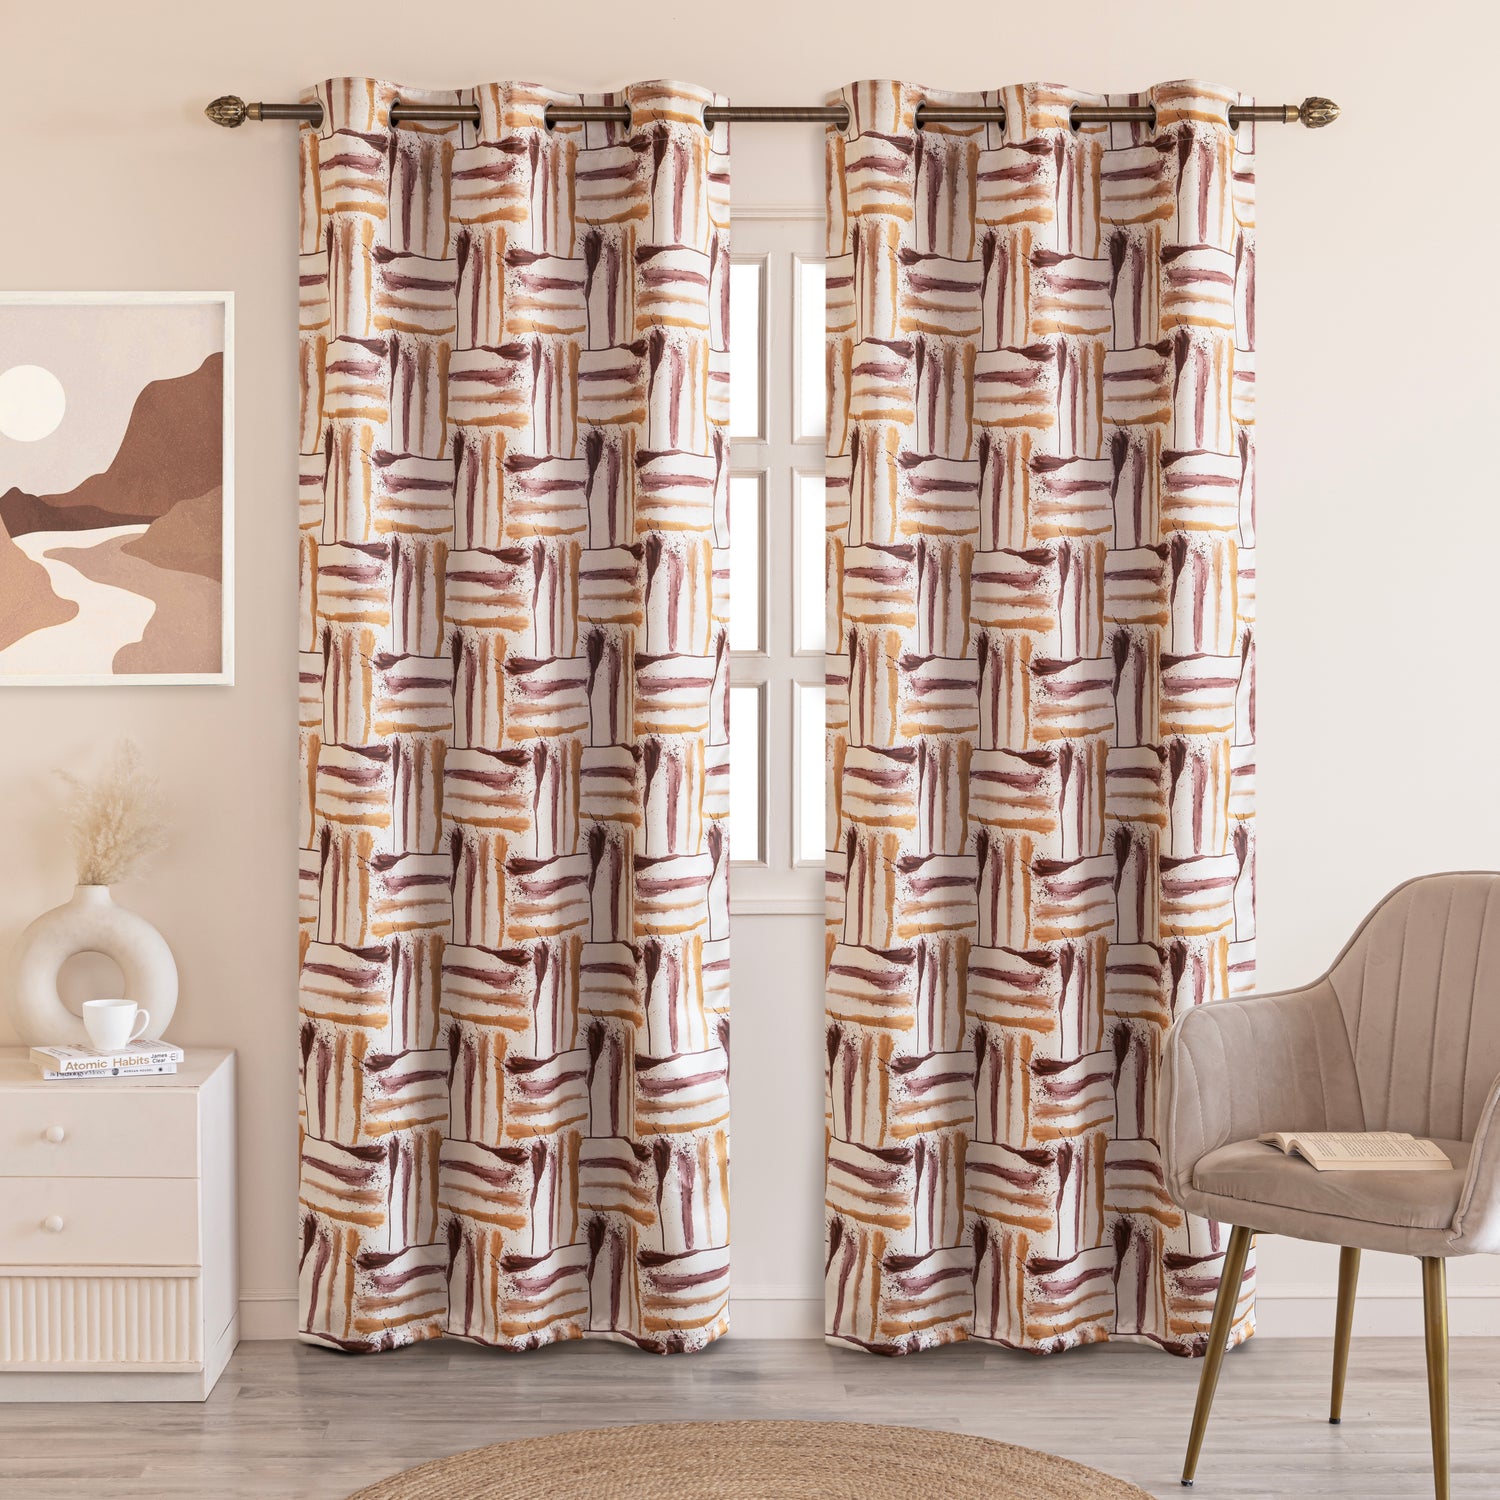 All Curtains